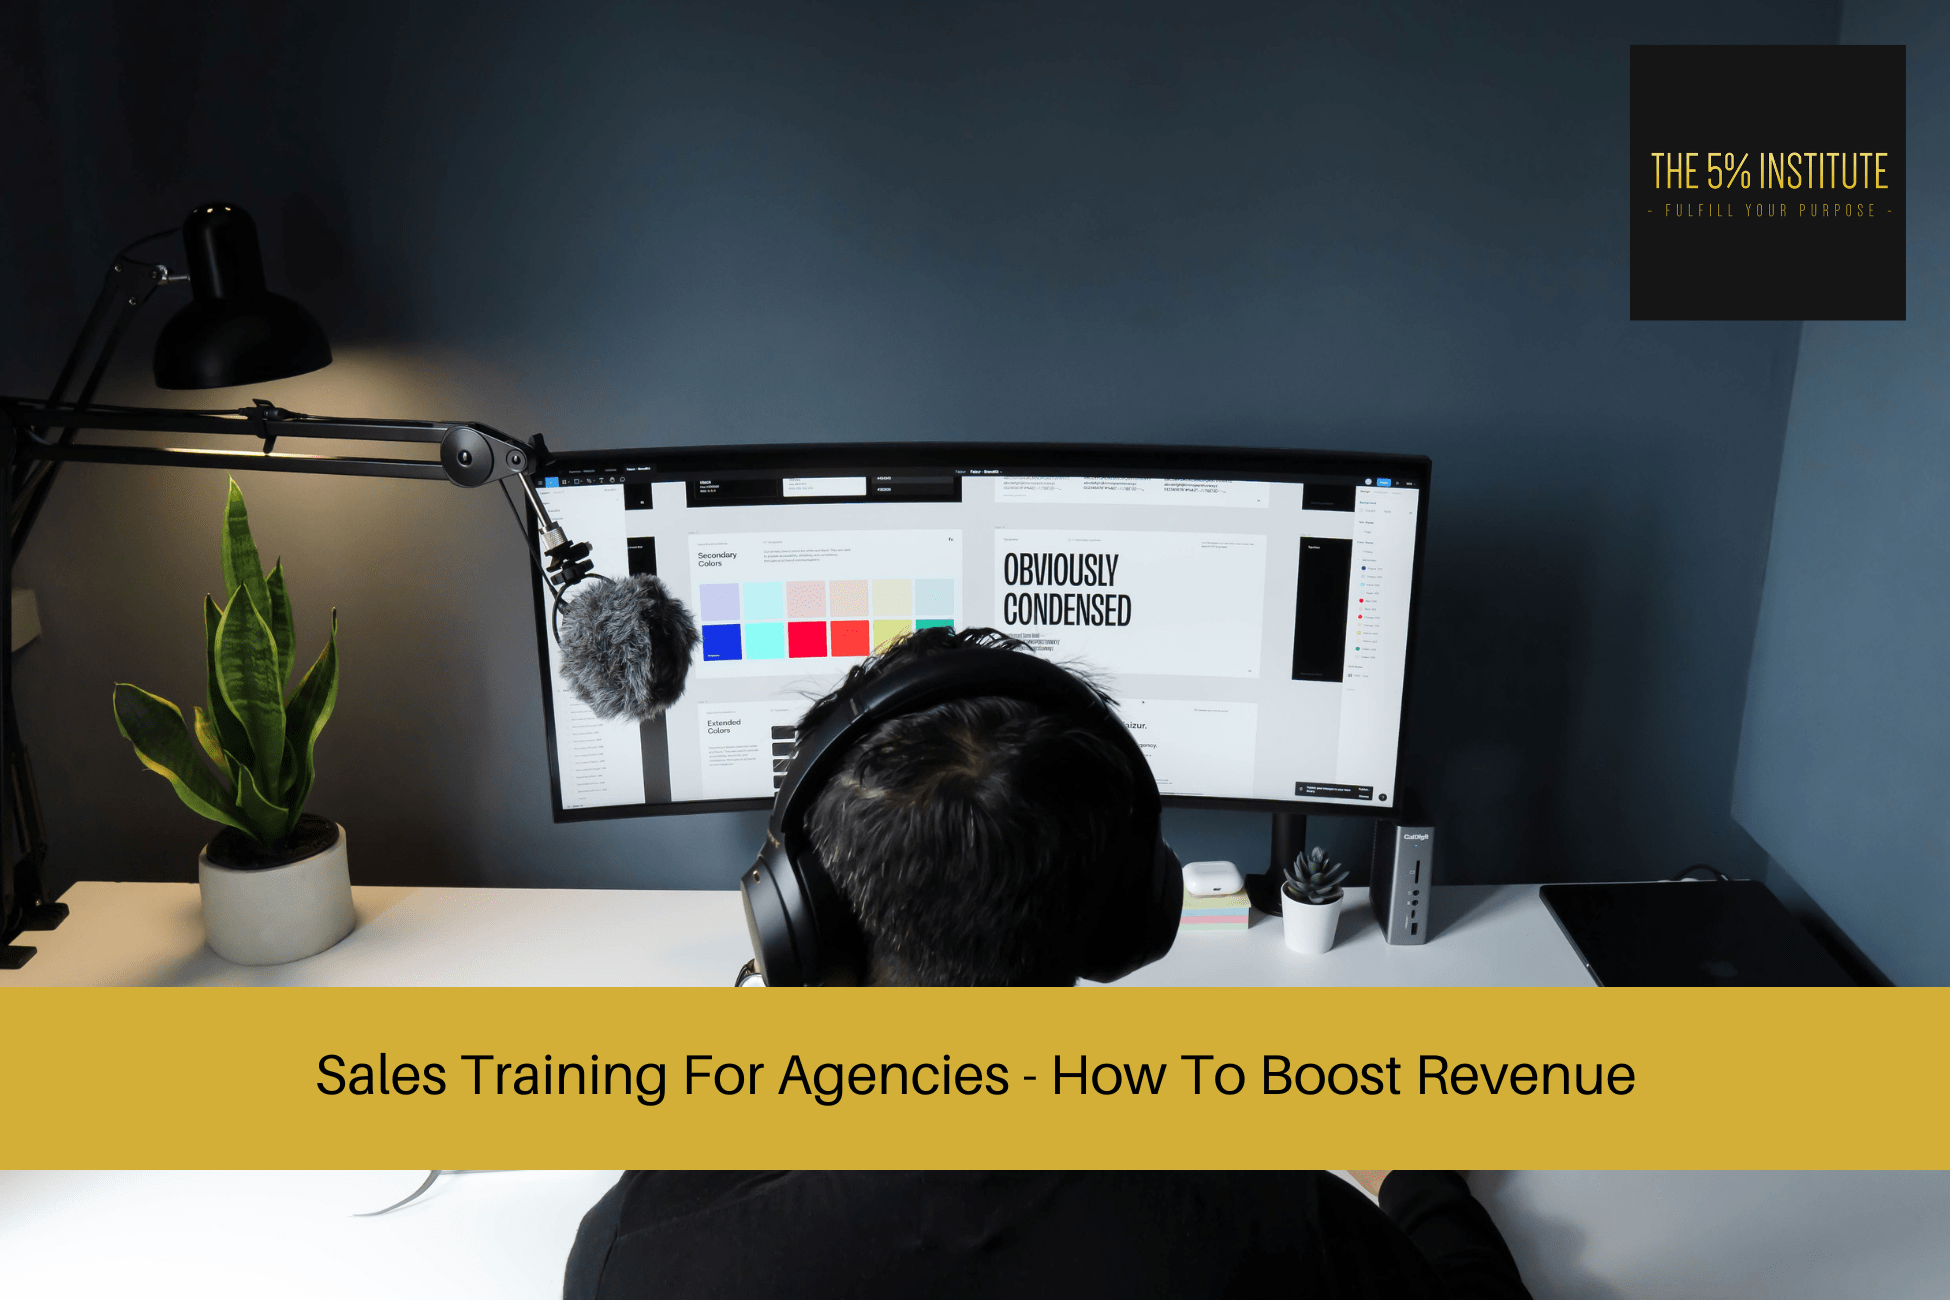 Sales Training For Agencies - How To Boost Revenue